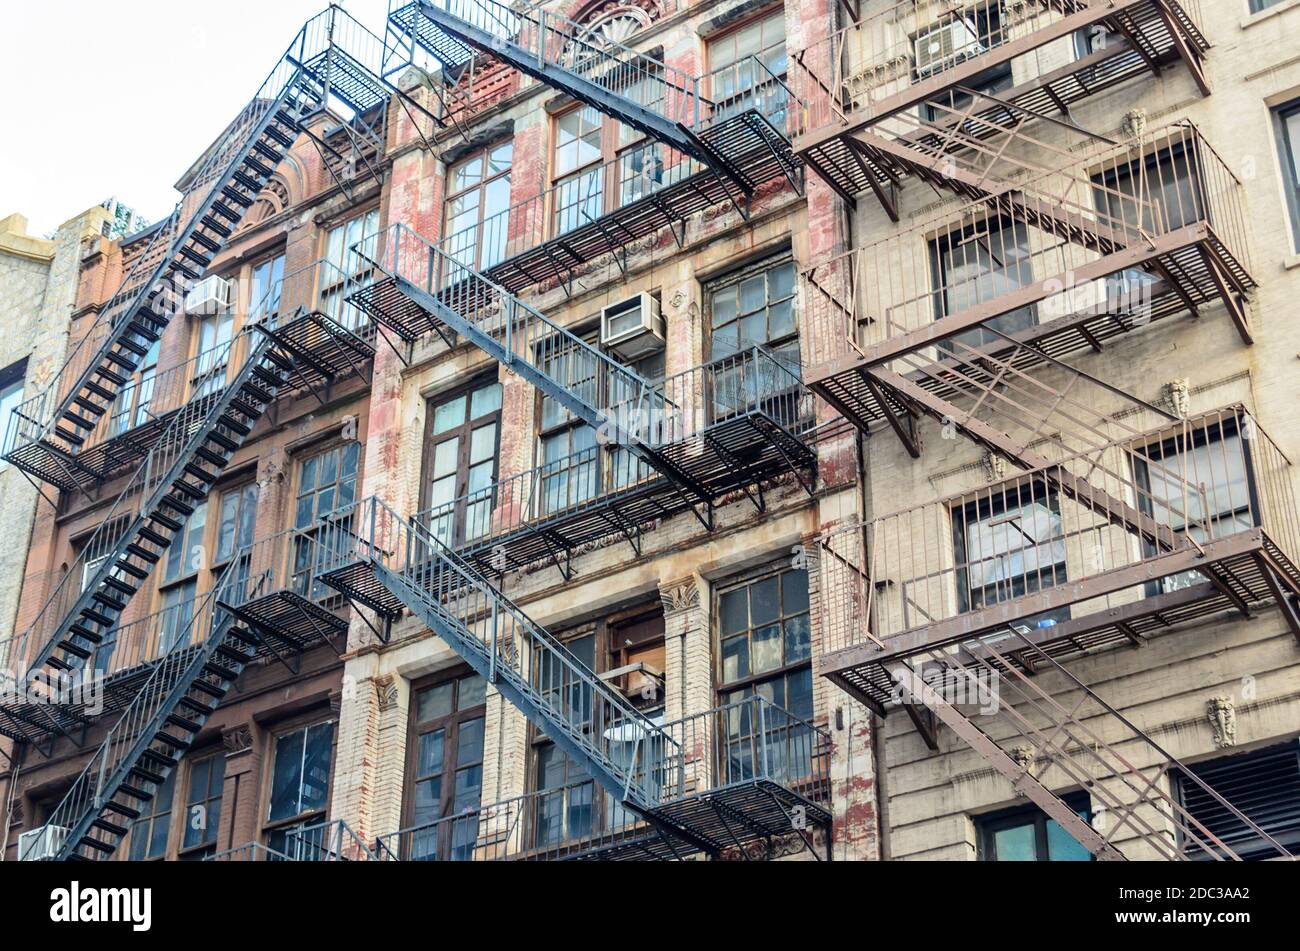 Low Angle View of Typical Apartment Buildings with Fire Escape Ladders in Manhattan,  New York City, USA Stock Photo